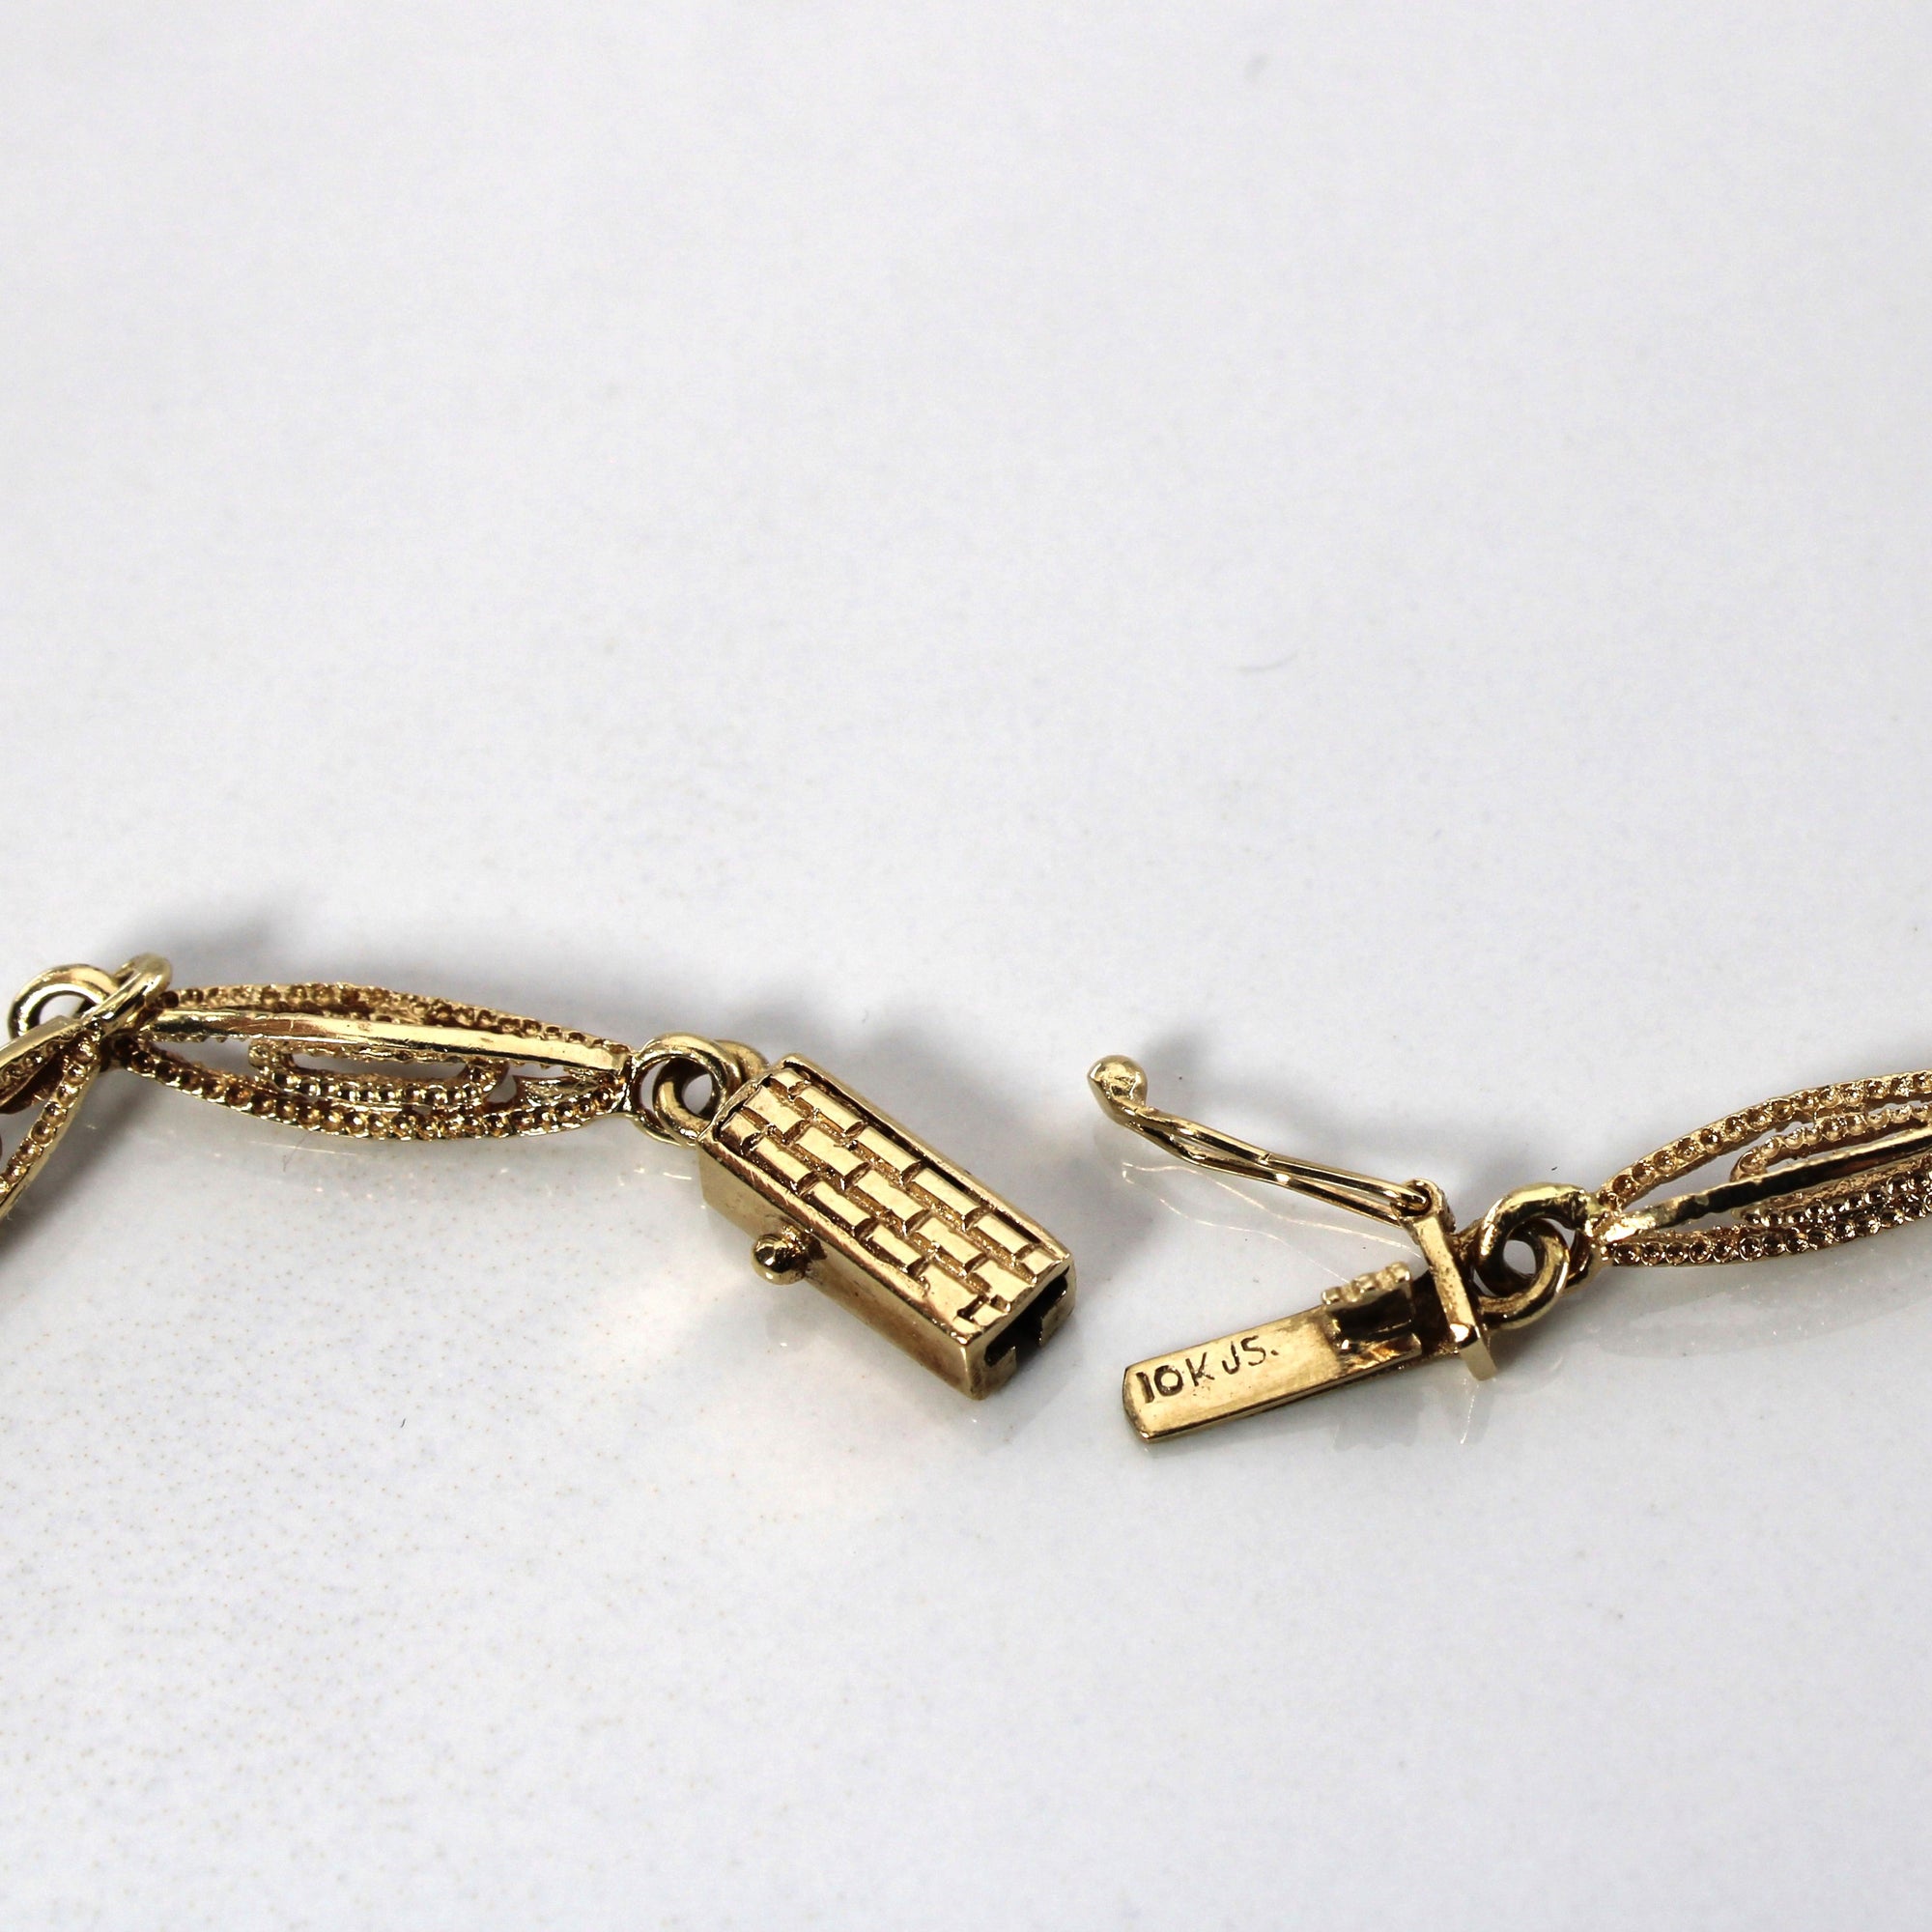 Textured Linked Yellow Gold Chain | 24